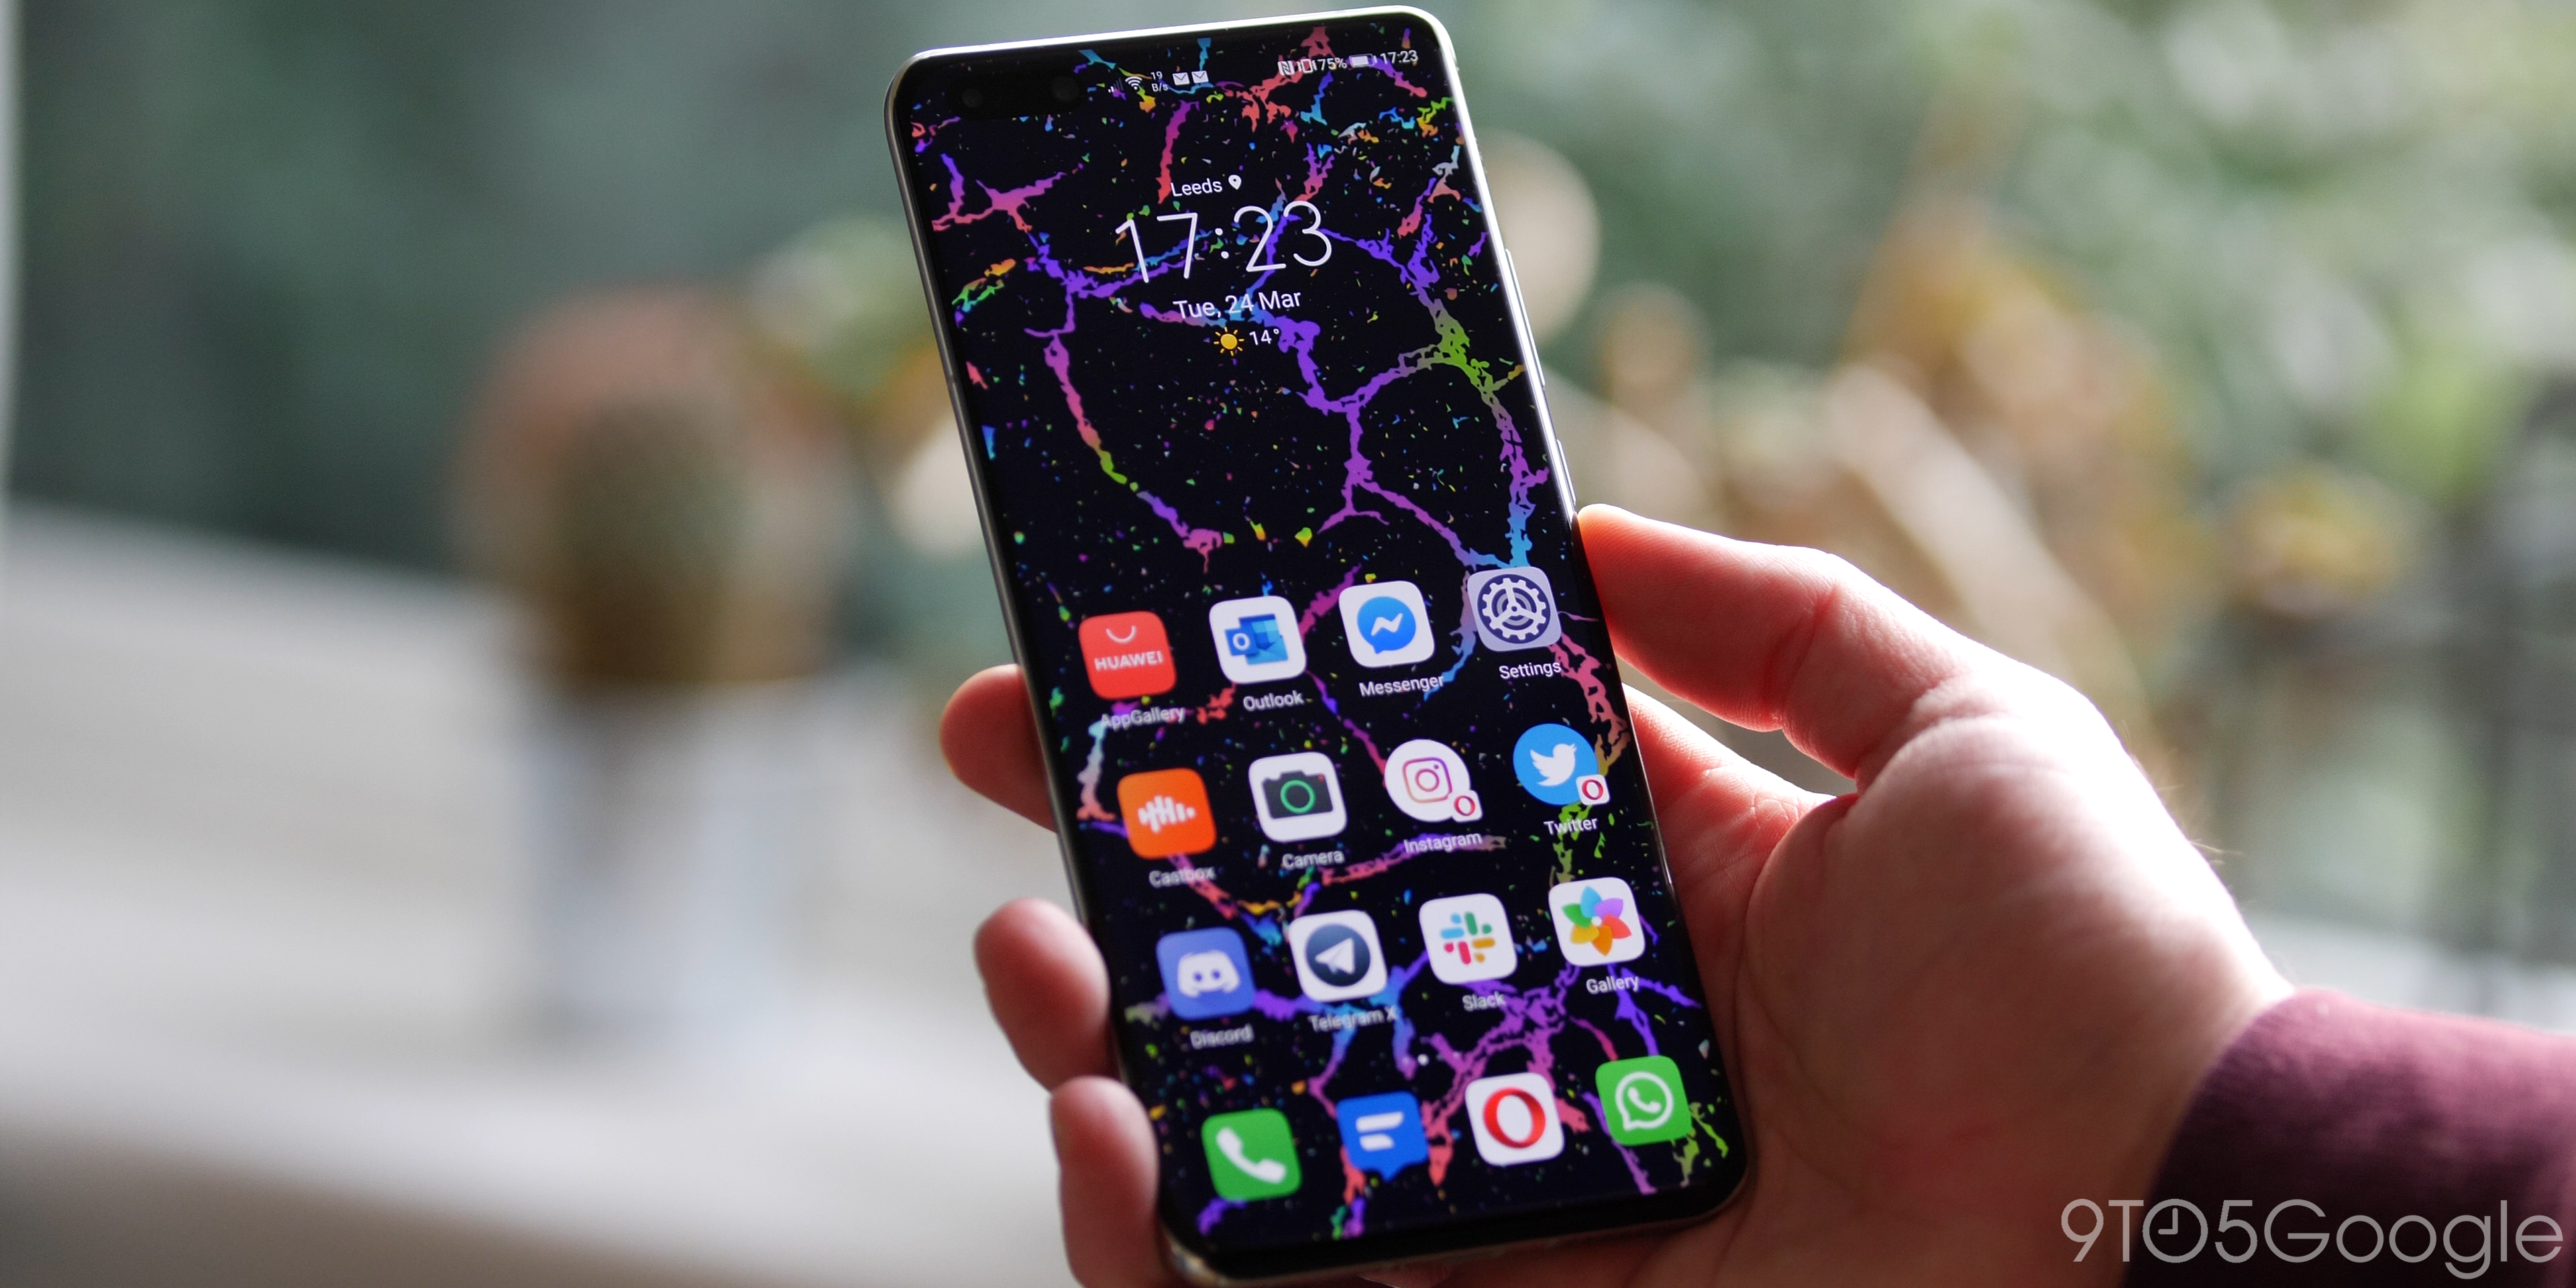 Huawei P40 Pro review: A great phone you shouldn't buy